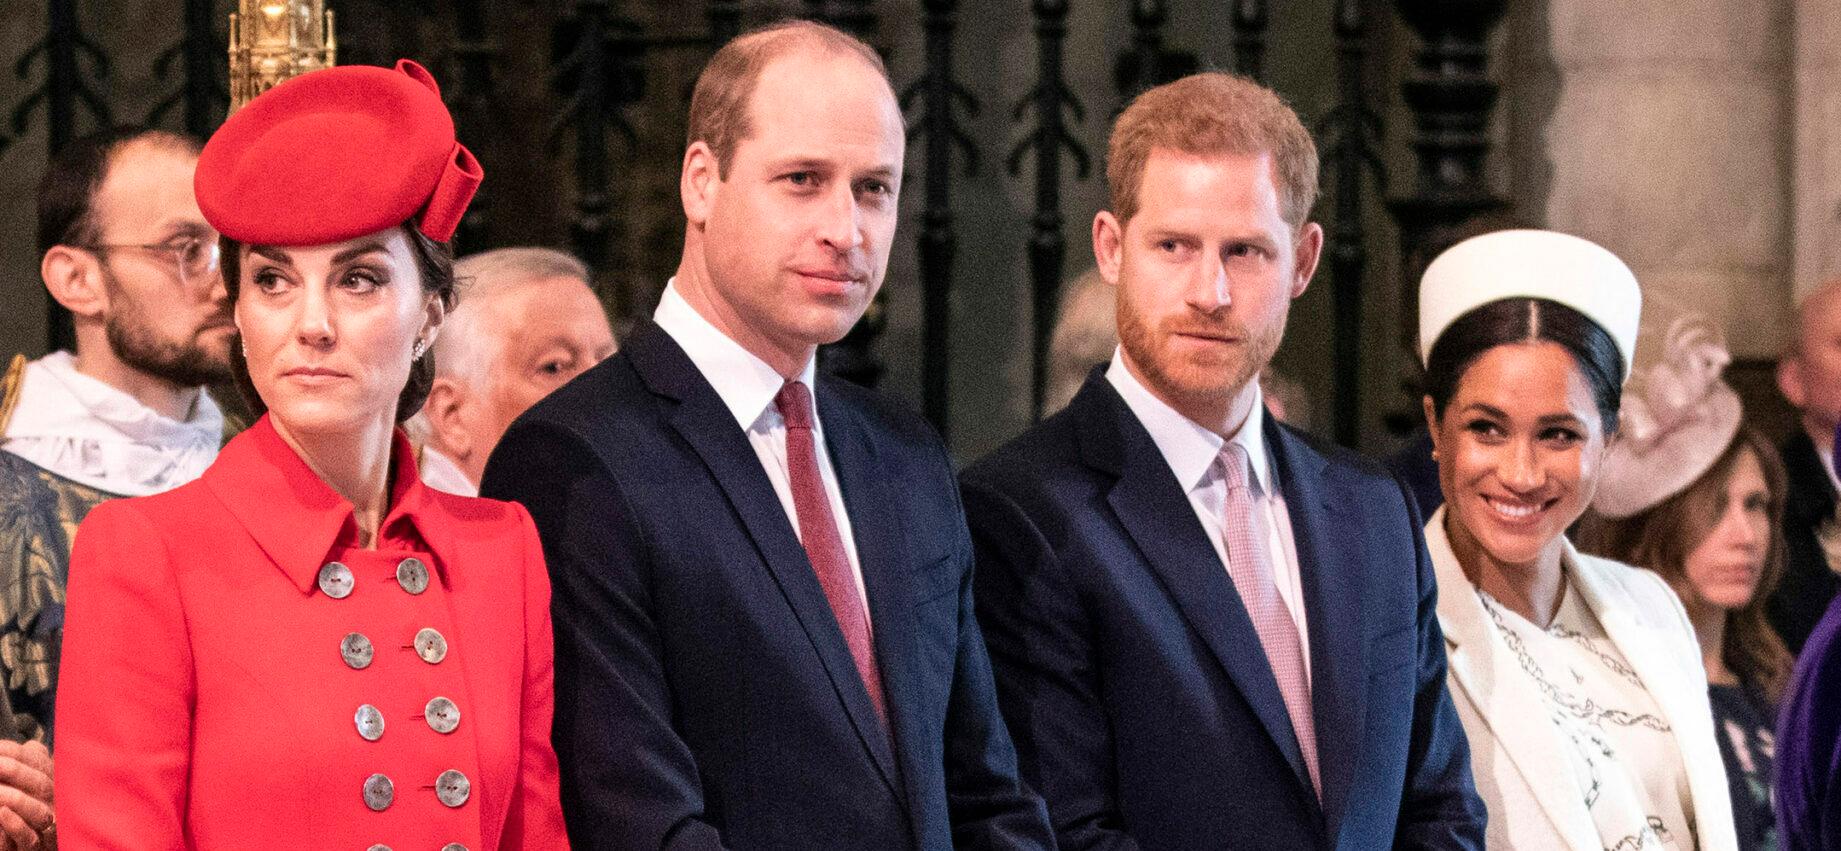 Why Prince William & Kate Middleton Will Not Meet Prince Harry During His UK Trip